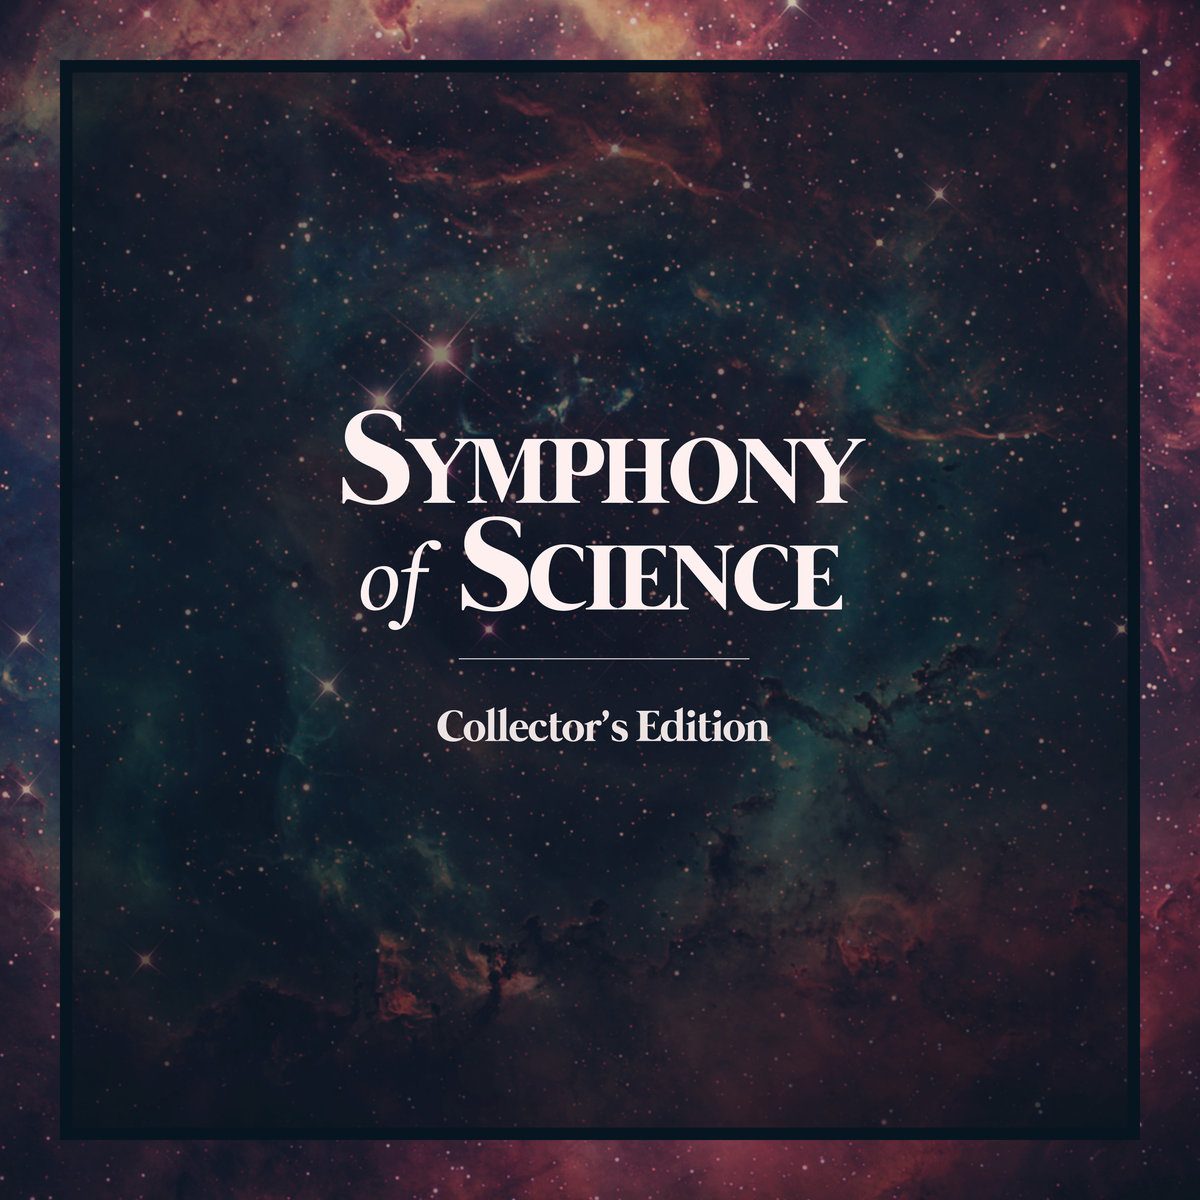 melodysheep – [2013] Symphony of Science Collector’s Edition